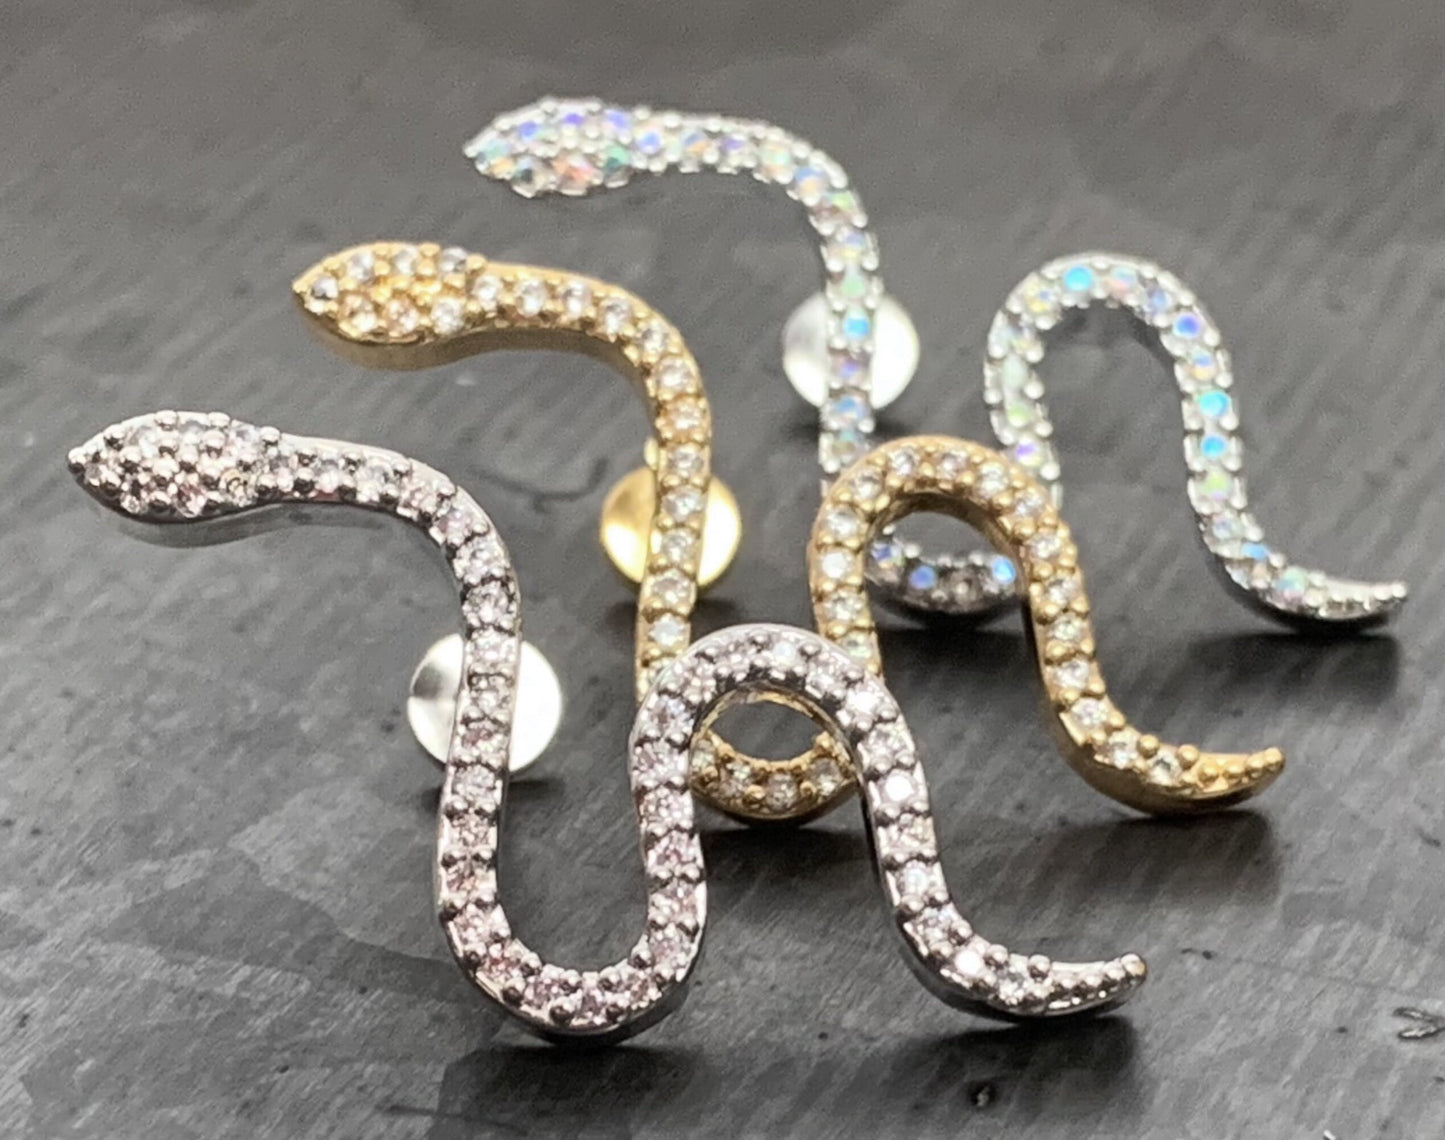 1 Piece Unique CZ Paved Steel Snake 16g Internally Threaded Labret - Sliver, Gold and Aurora Borealis available!